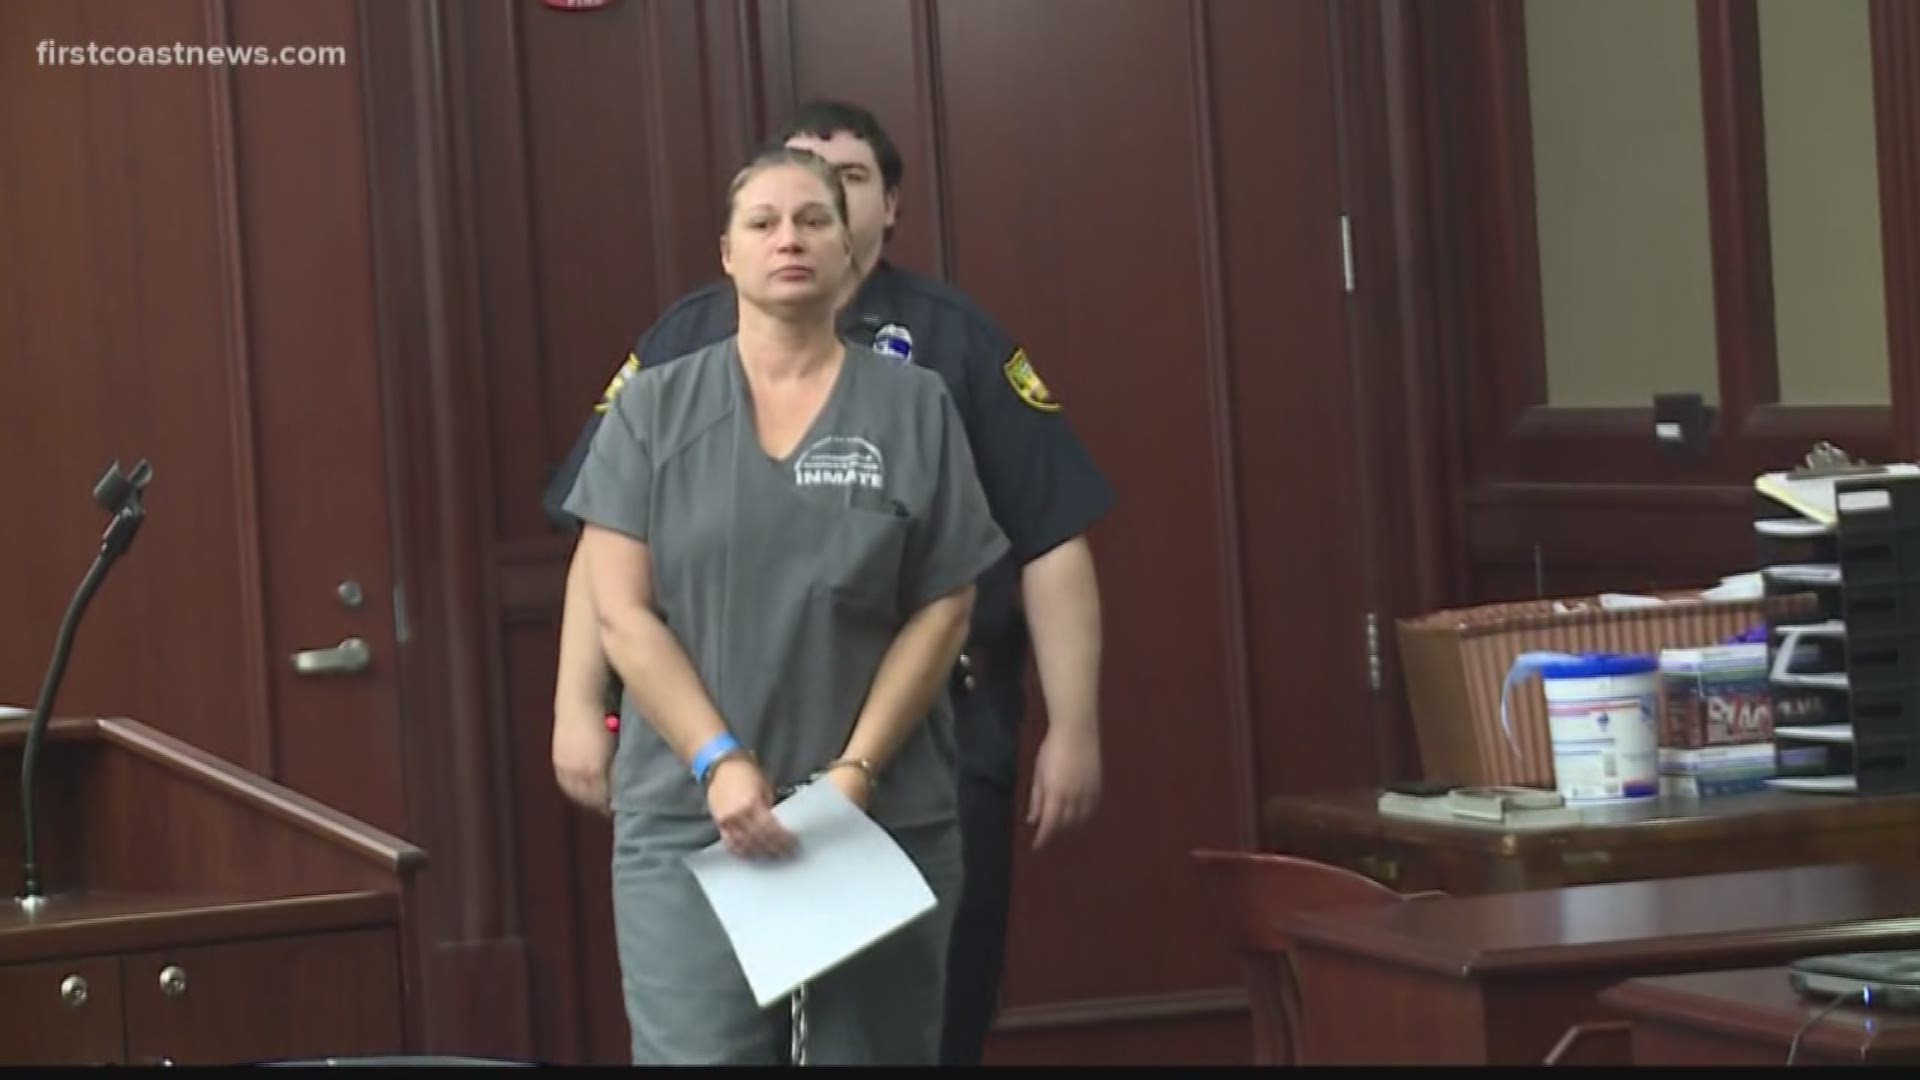 Kelley Permenter was sentenced to more than 10 years behind bars for hitting and killing 12-year-old Hunter Cope in March of 2017.